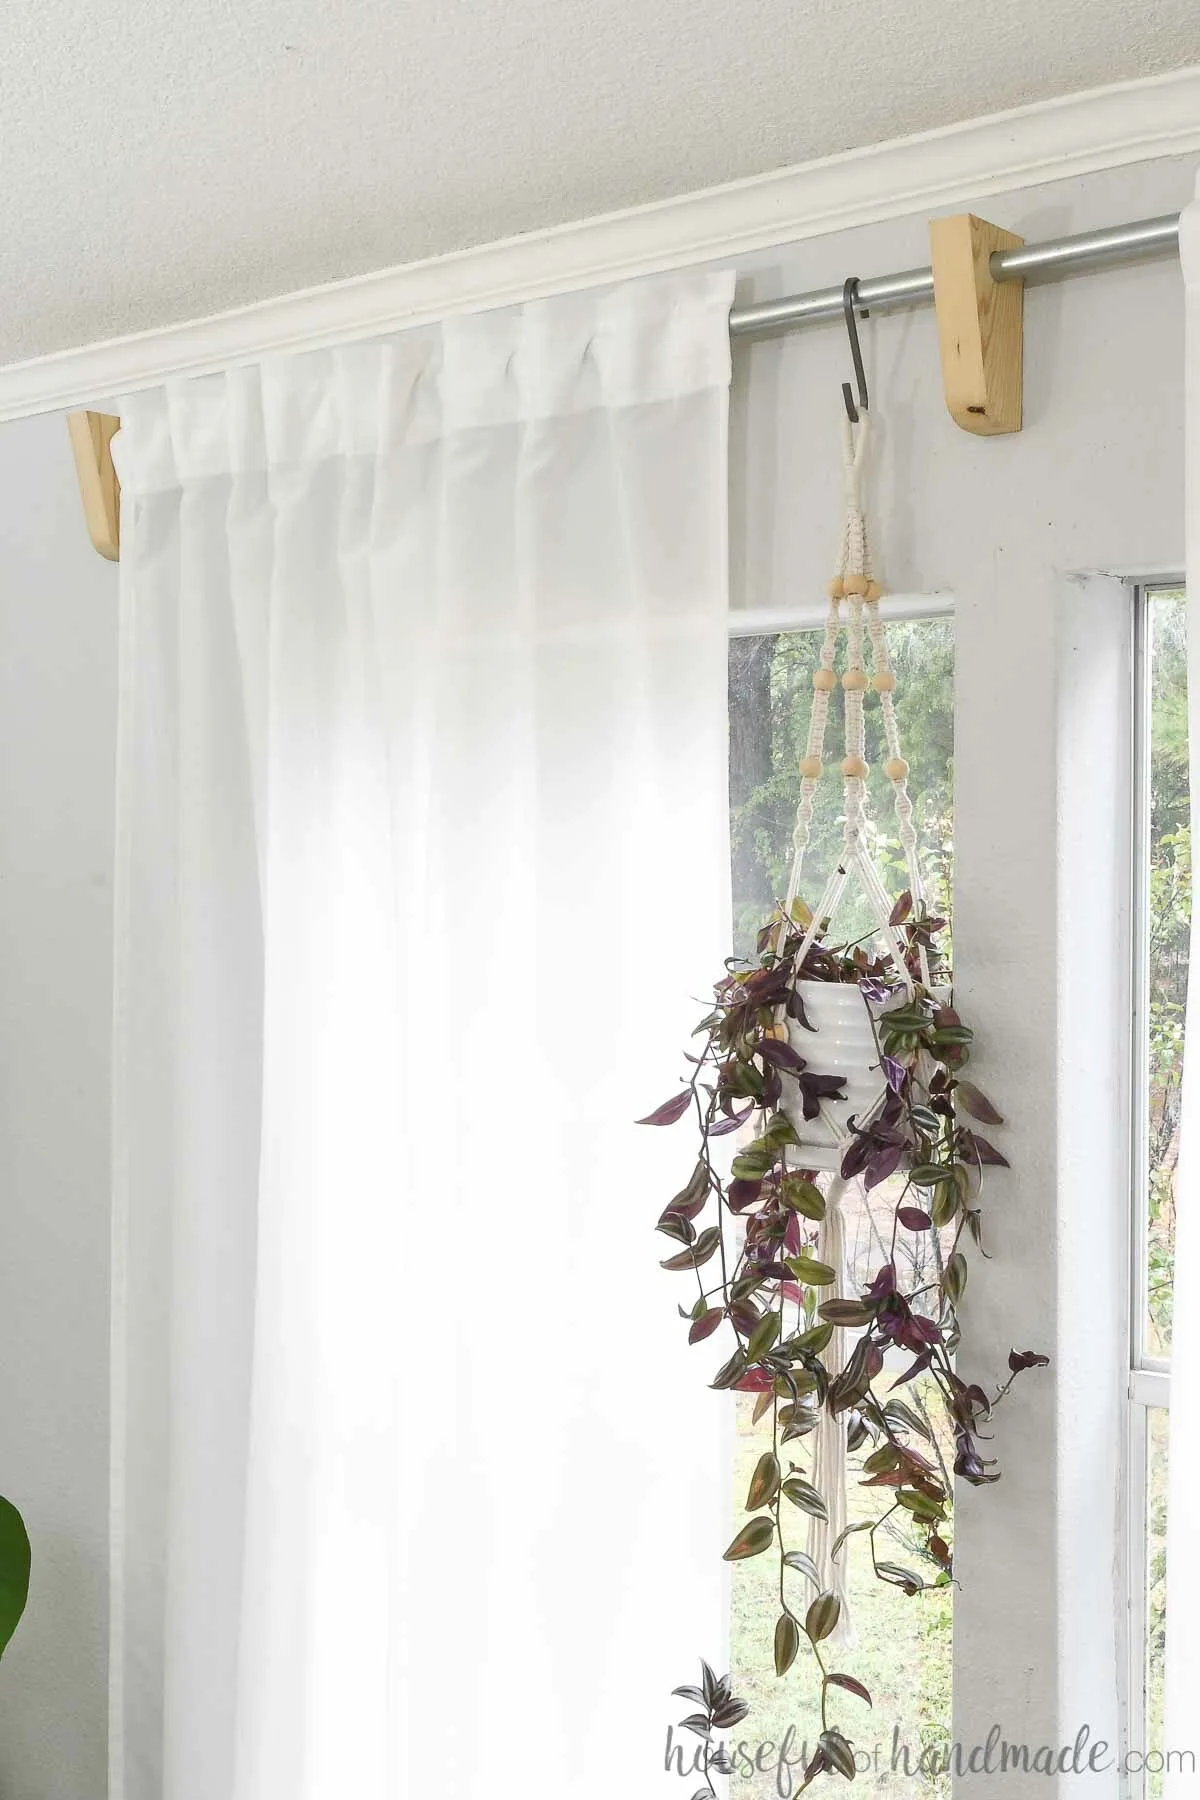 Where should curtain rod brackets be placed?